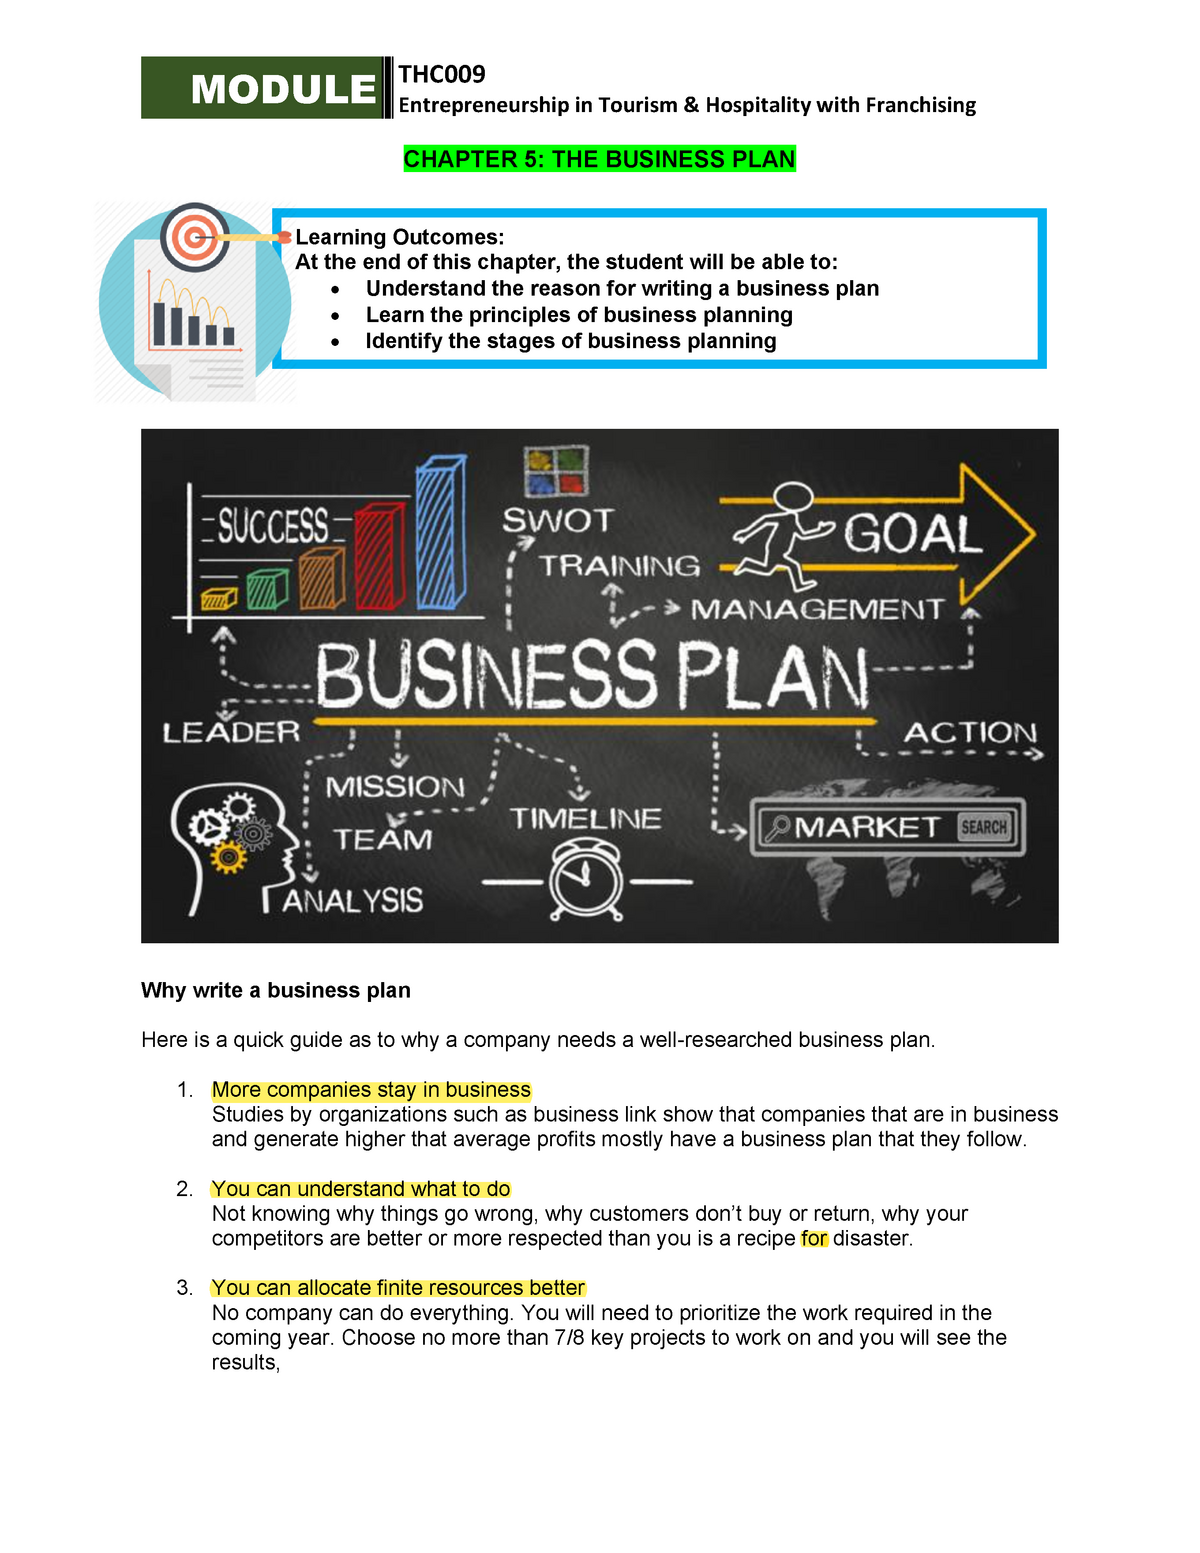 business plan in tourism and hospitality industry